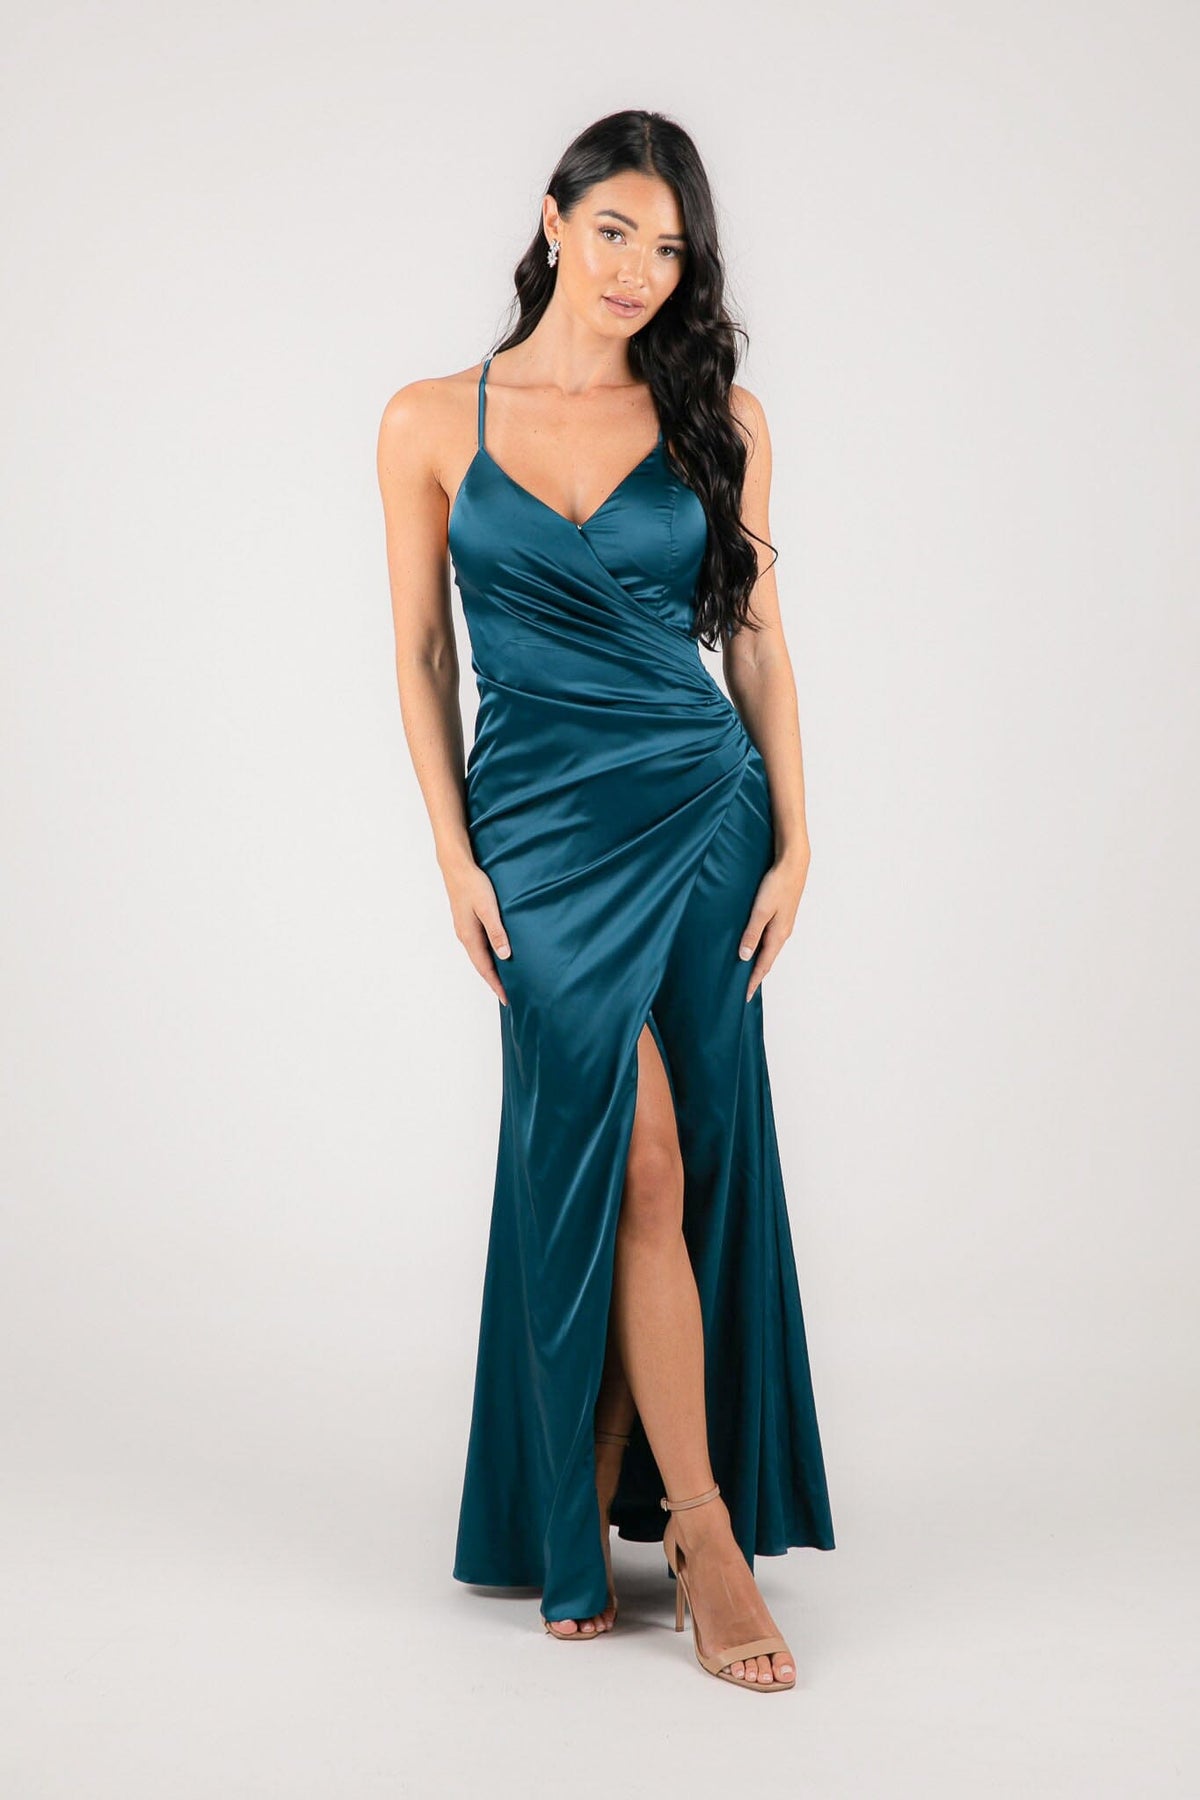 Satin Maxi Dress with V Neckline, Gathered Waist Detail and Front Split in Teal Green